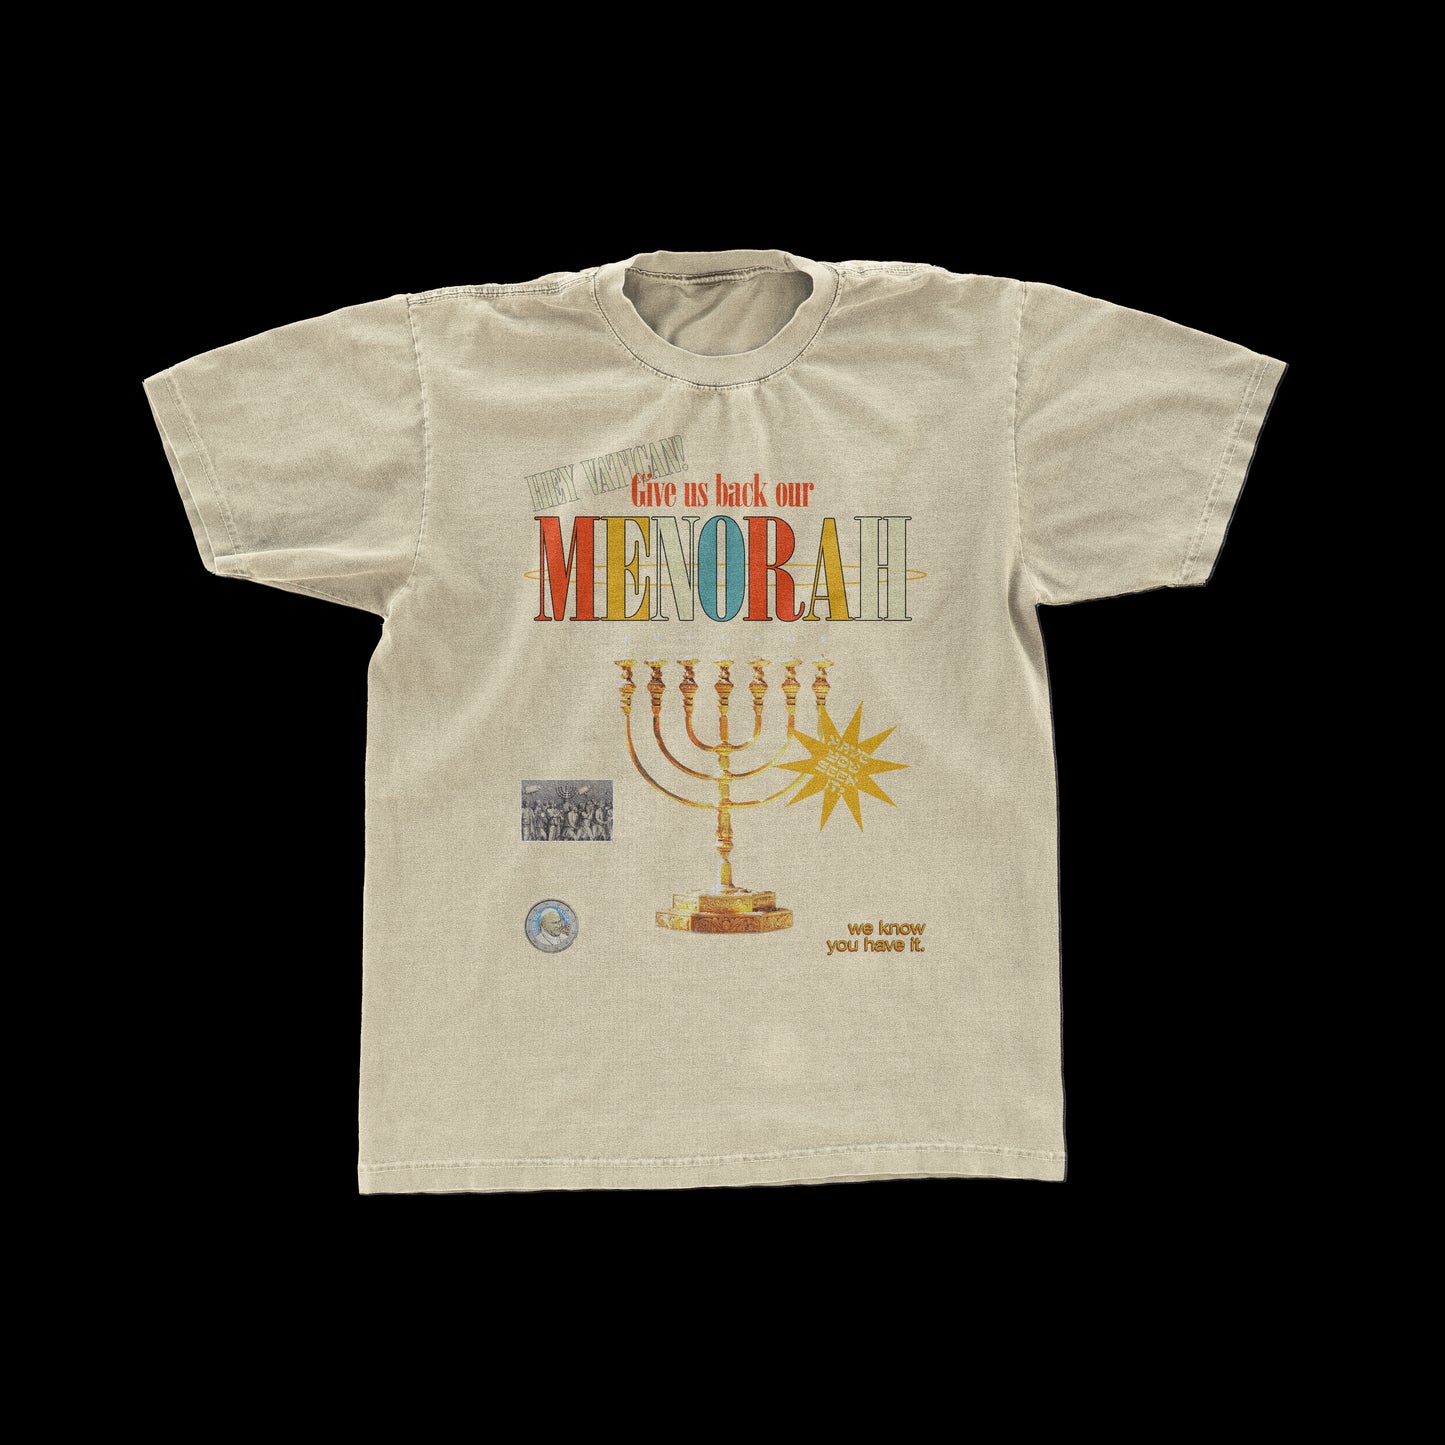 "Give Back our Menorah" VINTAGE TEE